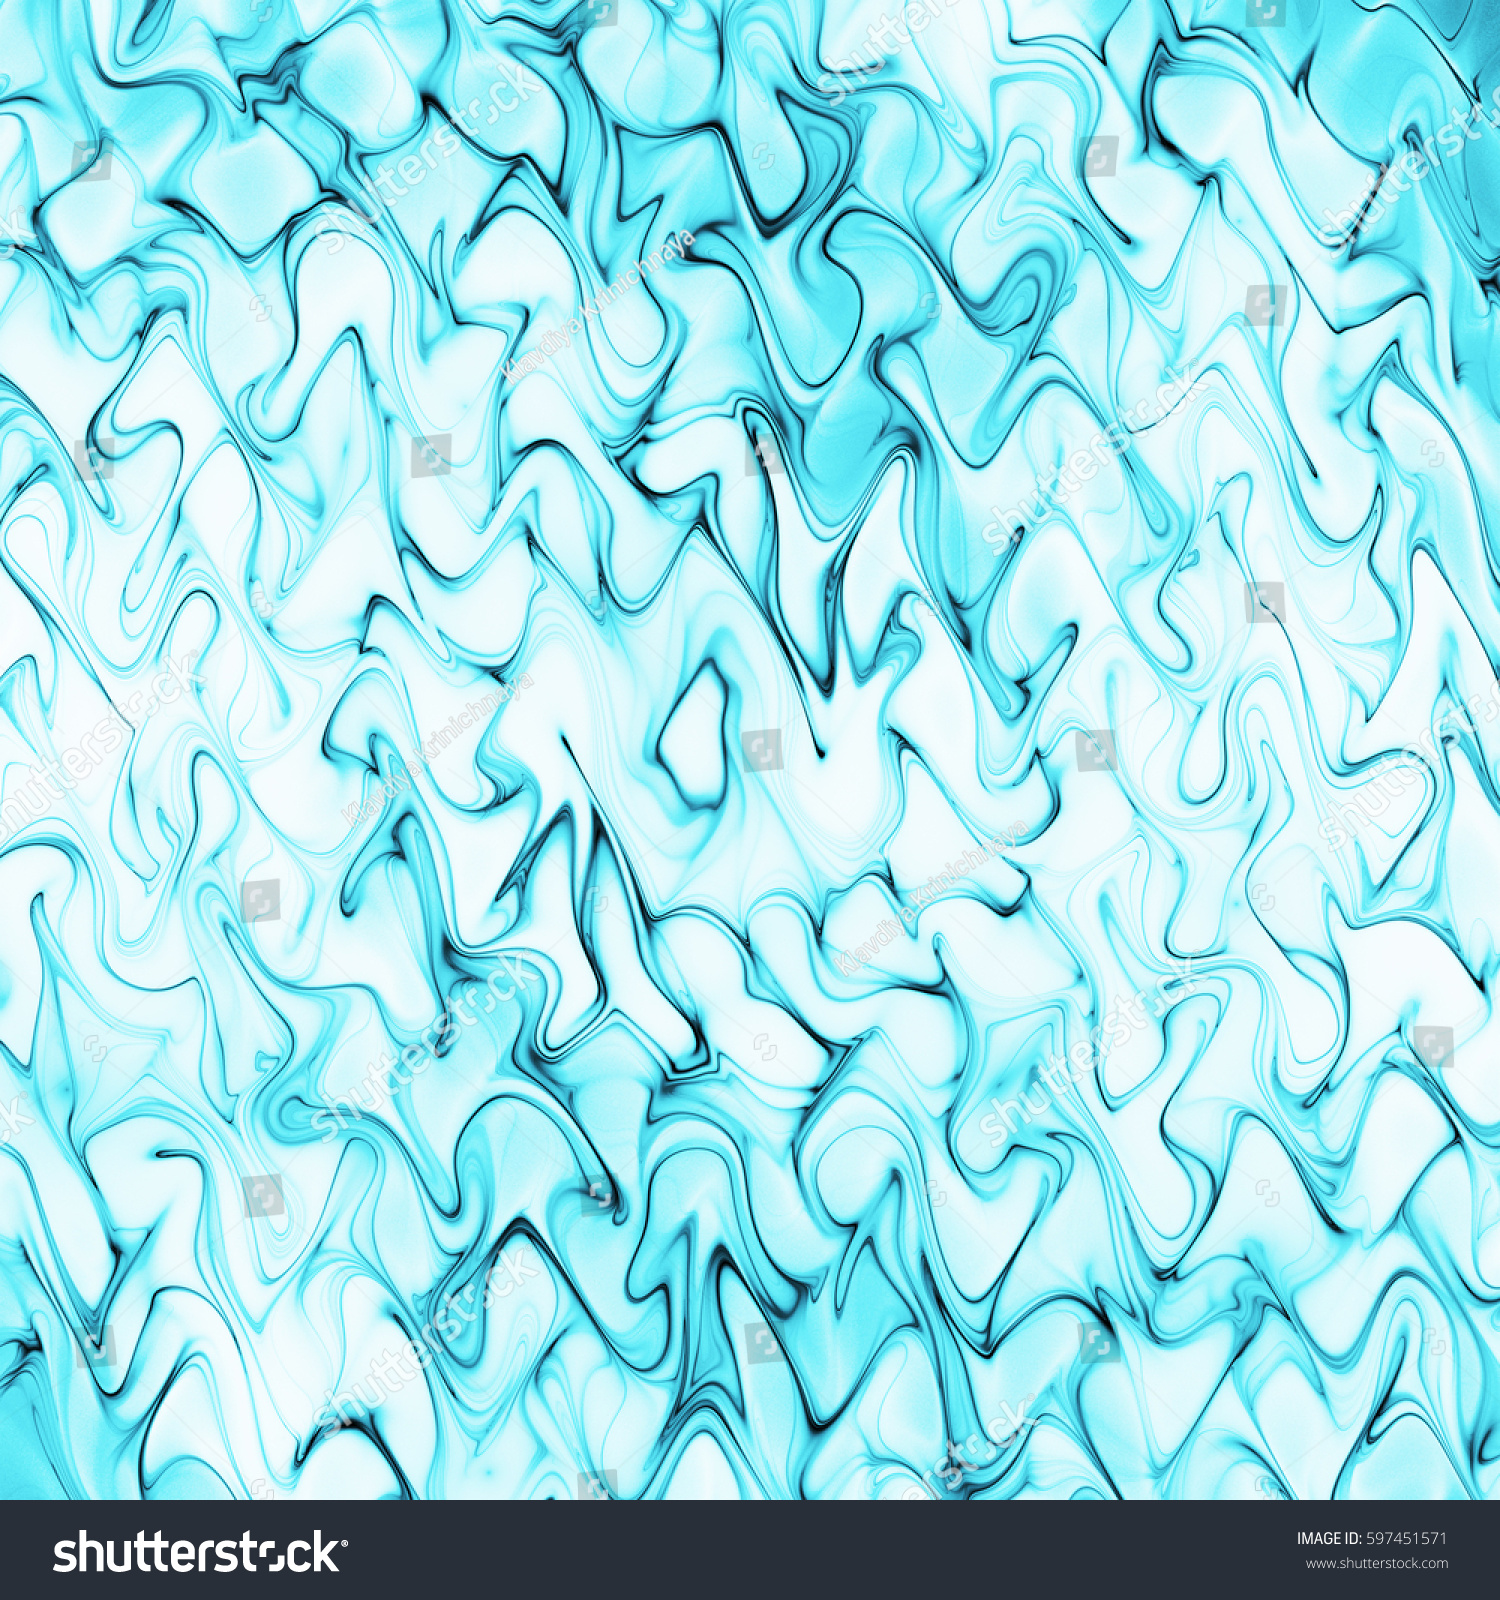 Abstract Blue Ripples On White Background Stock Illustration ...